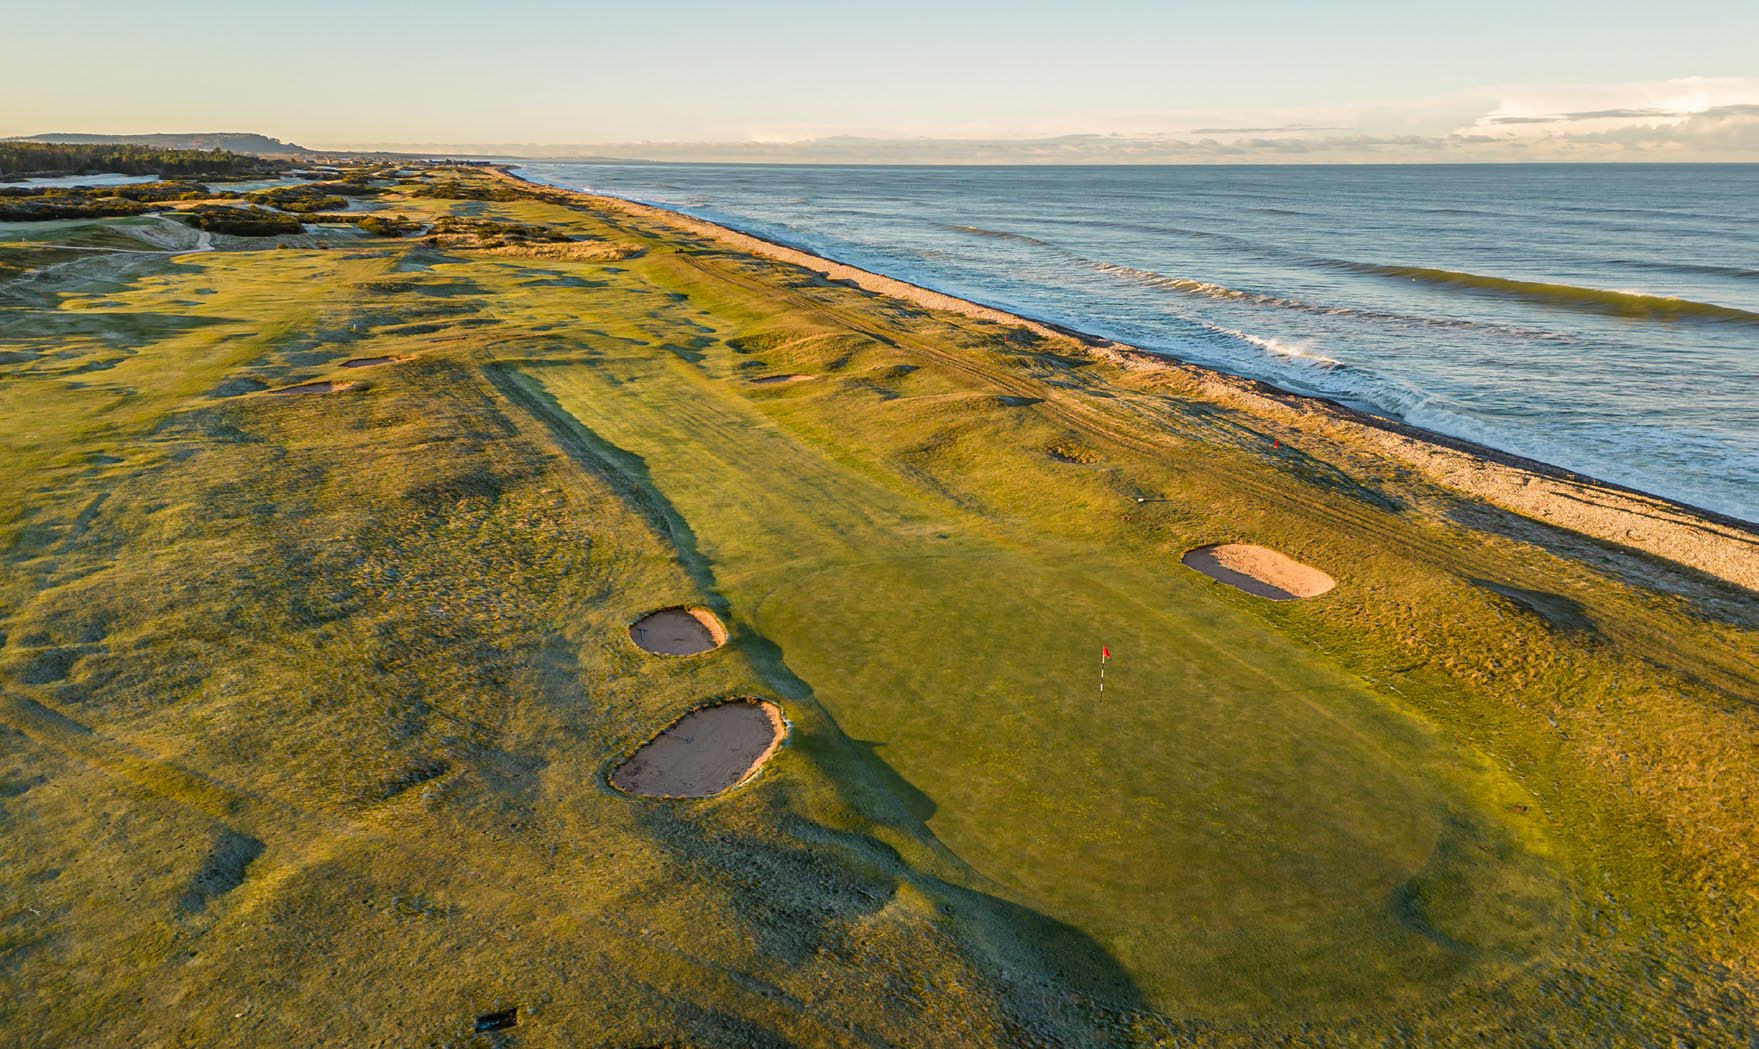 American golfers snap up Spey Bay Golf Club for ‘well over’ asking price of £750k